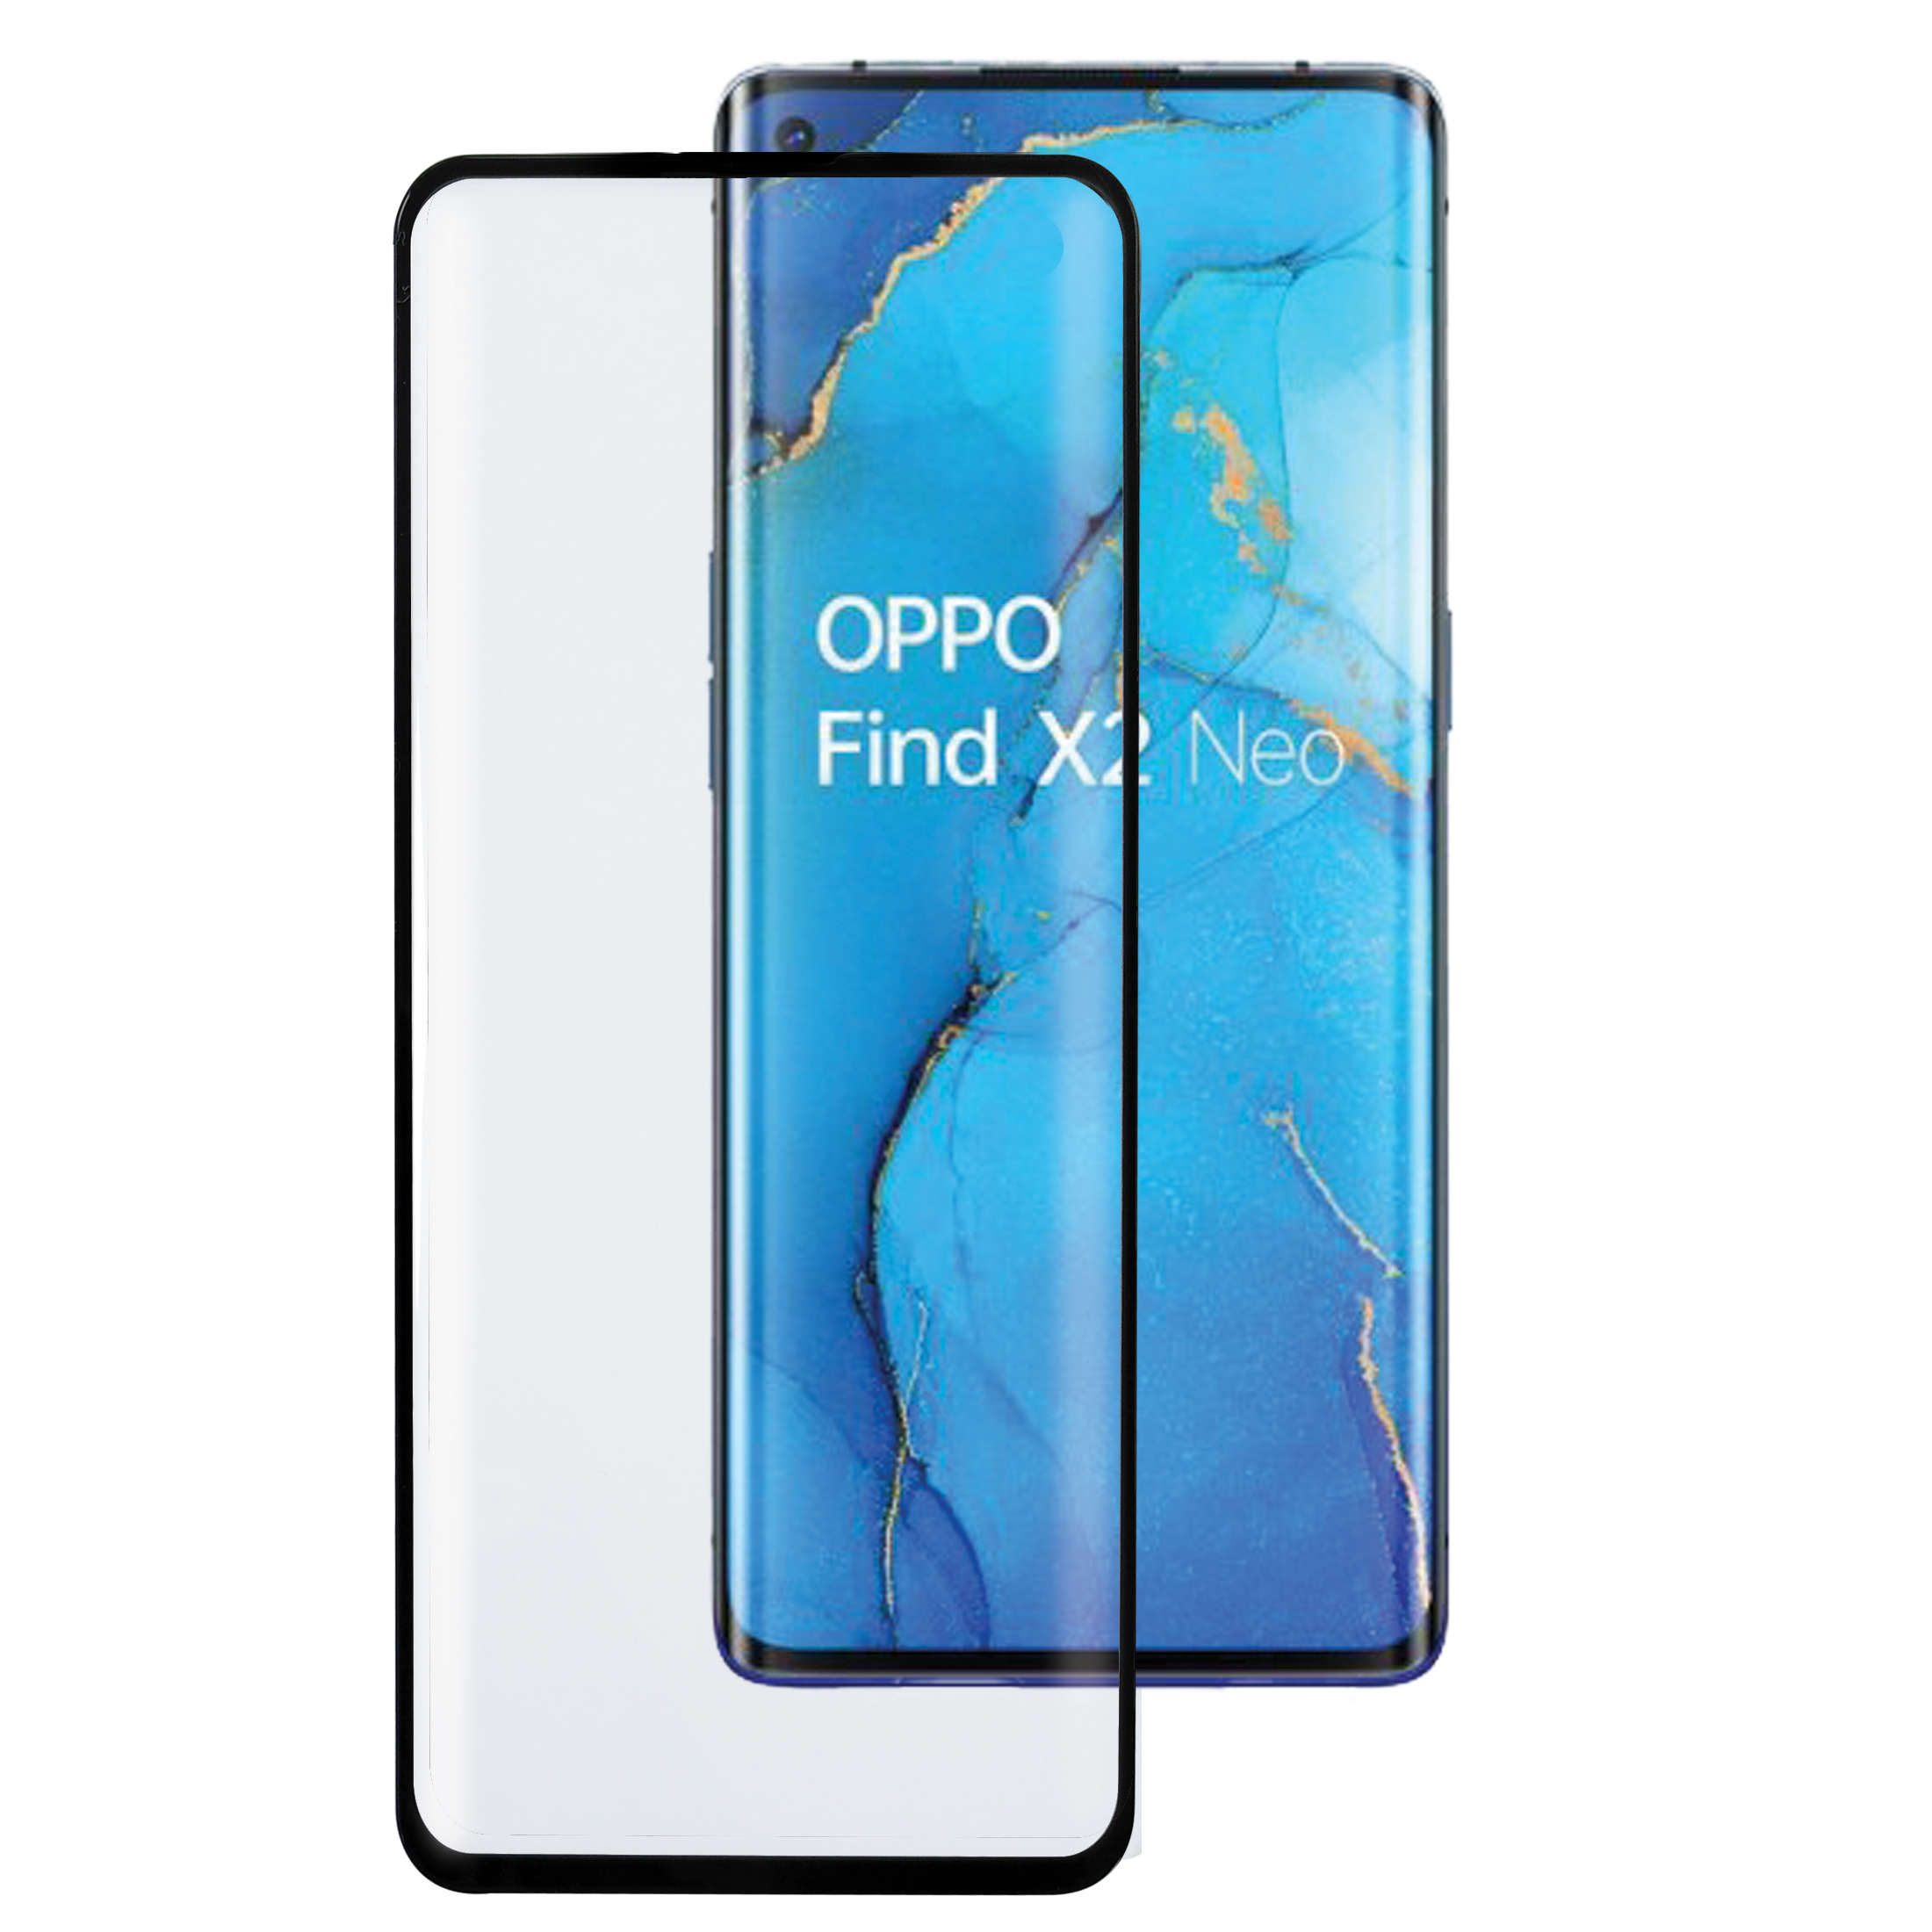 Premium 4D tempered glass screen protector for Oppo Find X2 Neo | Ideus